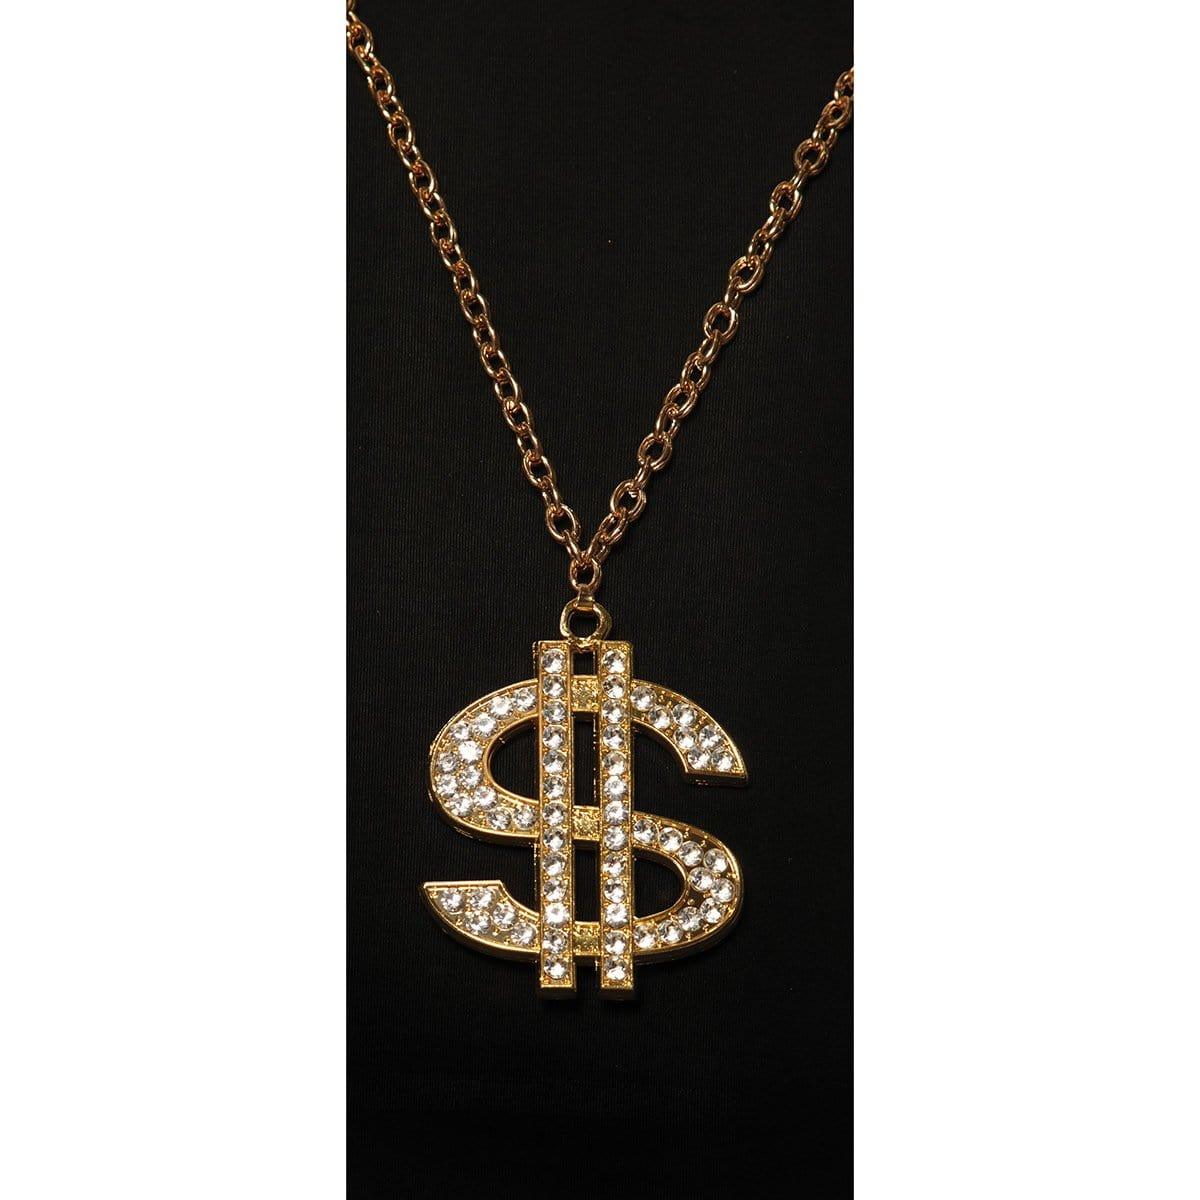 Buy Costume Accessories Dollar sign chain necklace sold at Party Expert